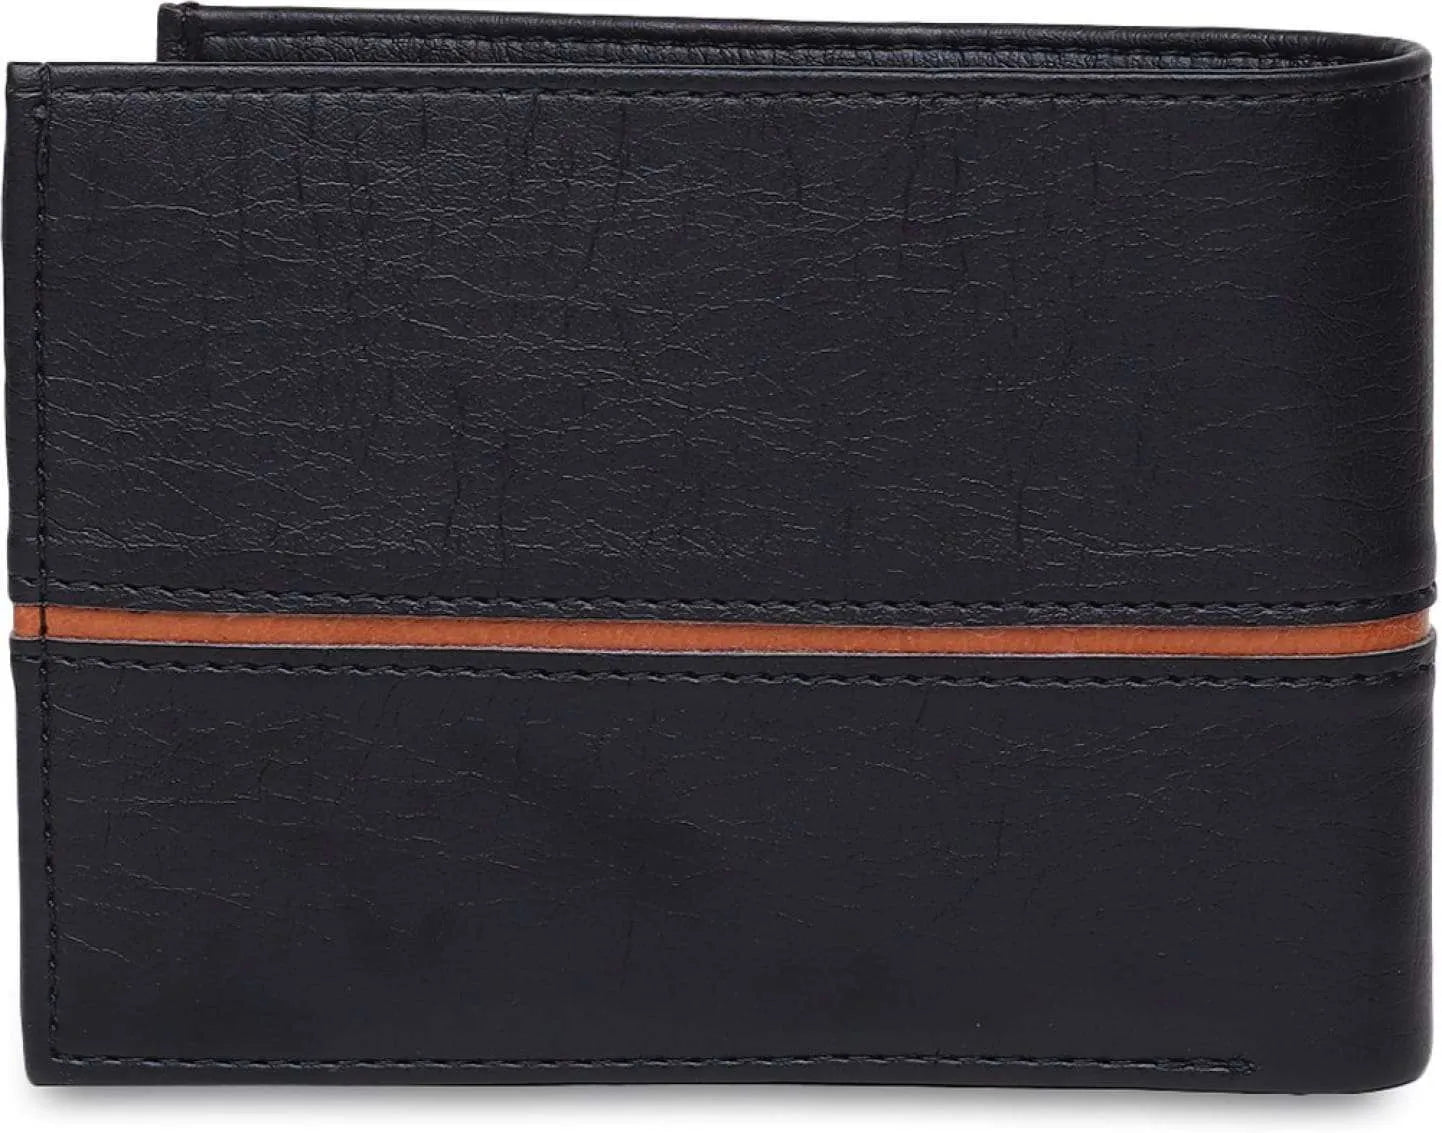 wallet for man Genuine Leather RFID Blocking Wallet Men Cow Leather Purse Men’s business card